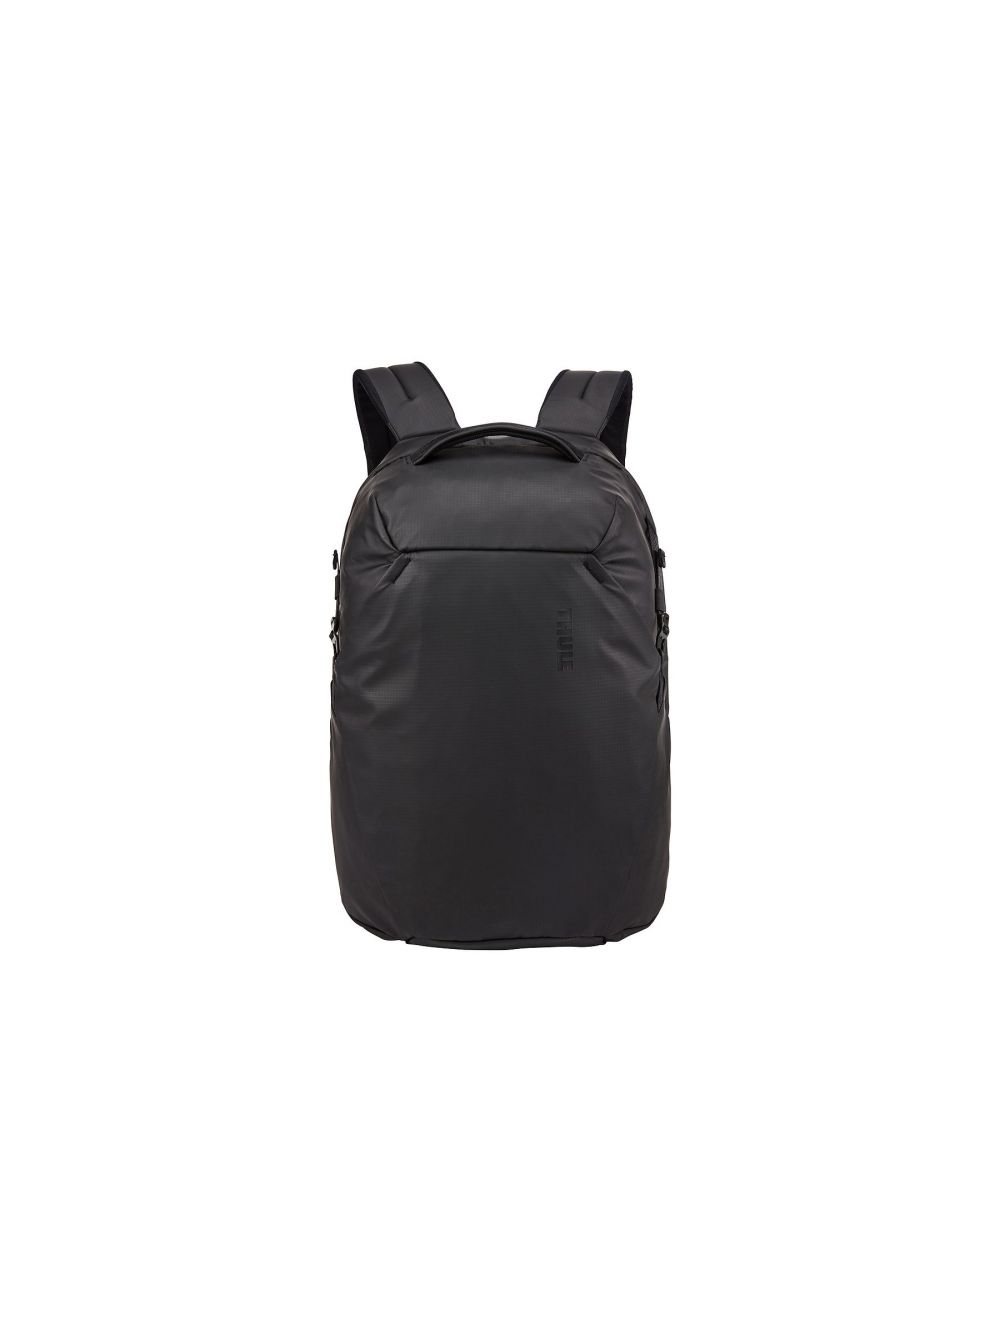 Thule Tact Backpack 21L Black 14-inch